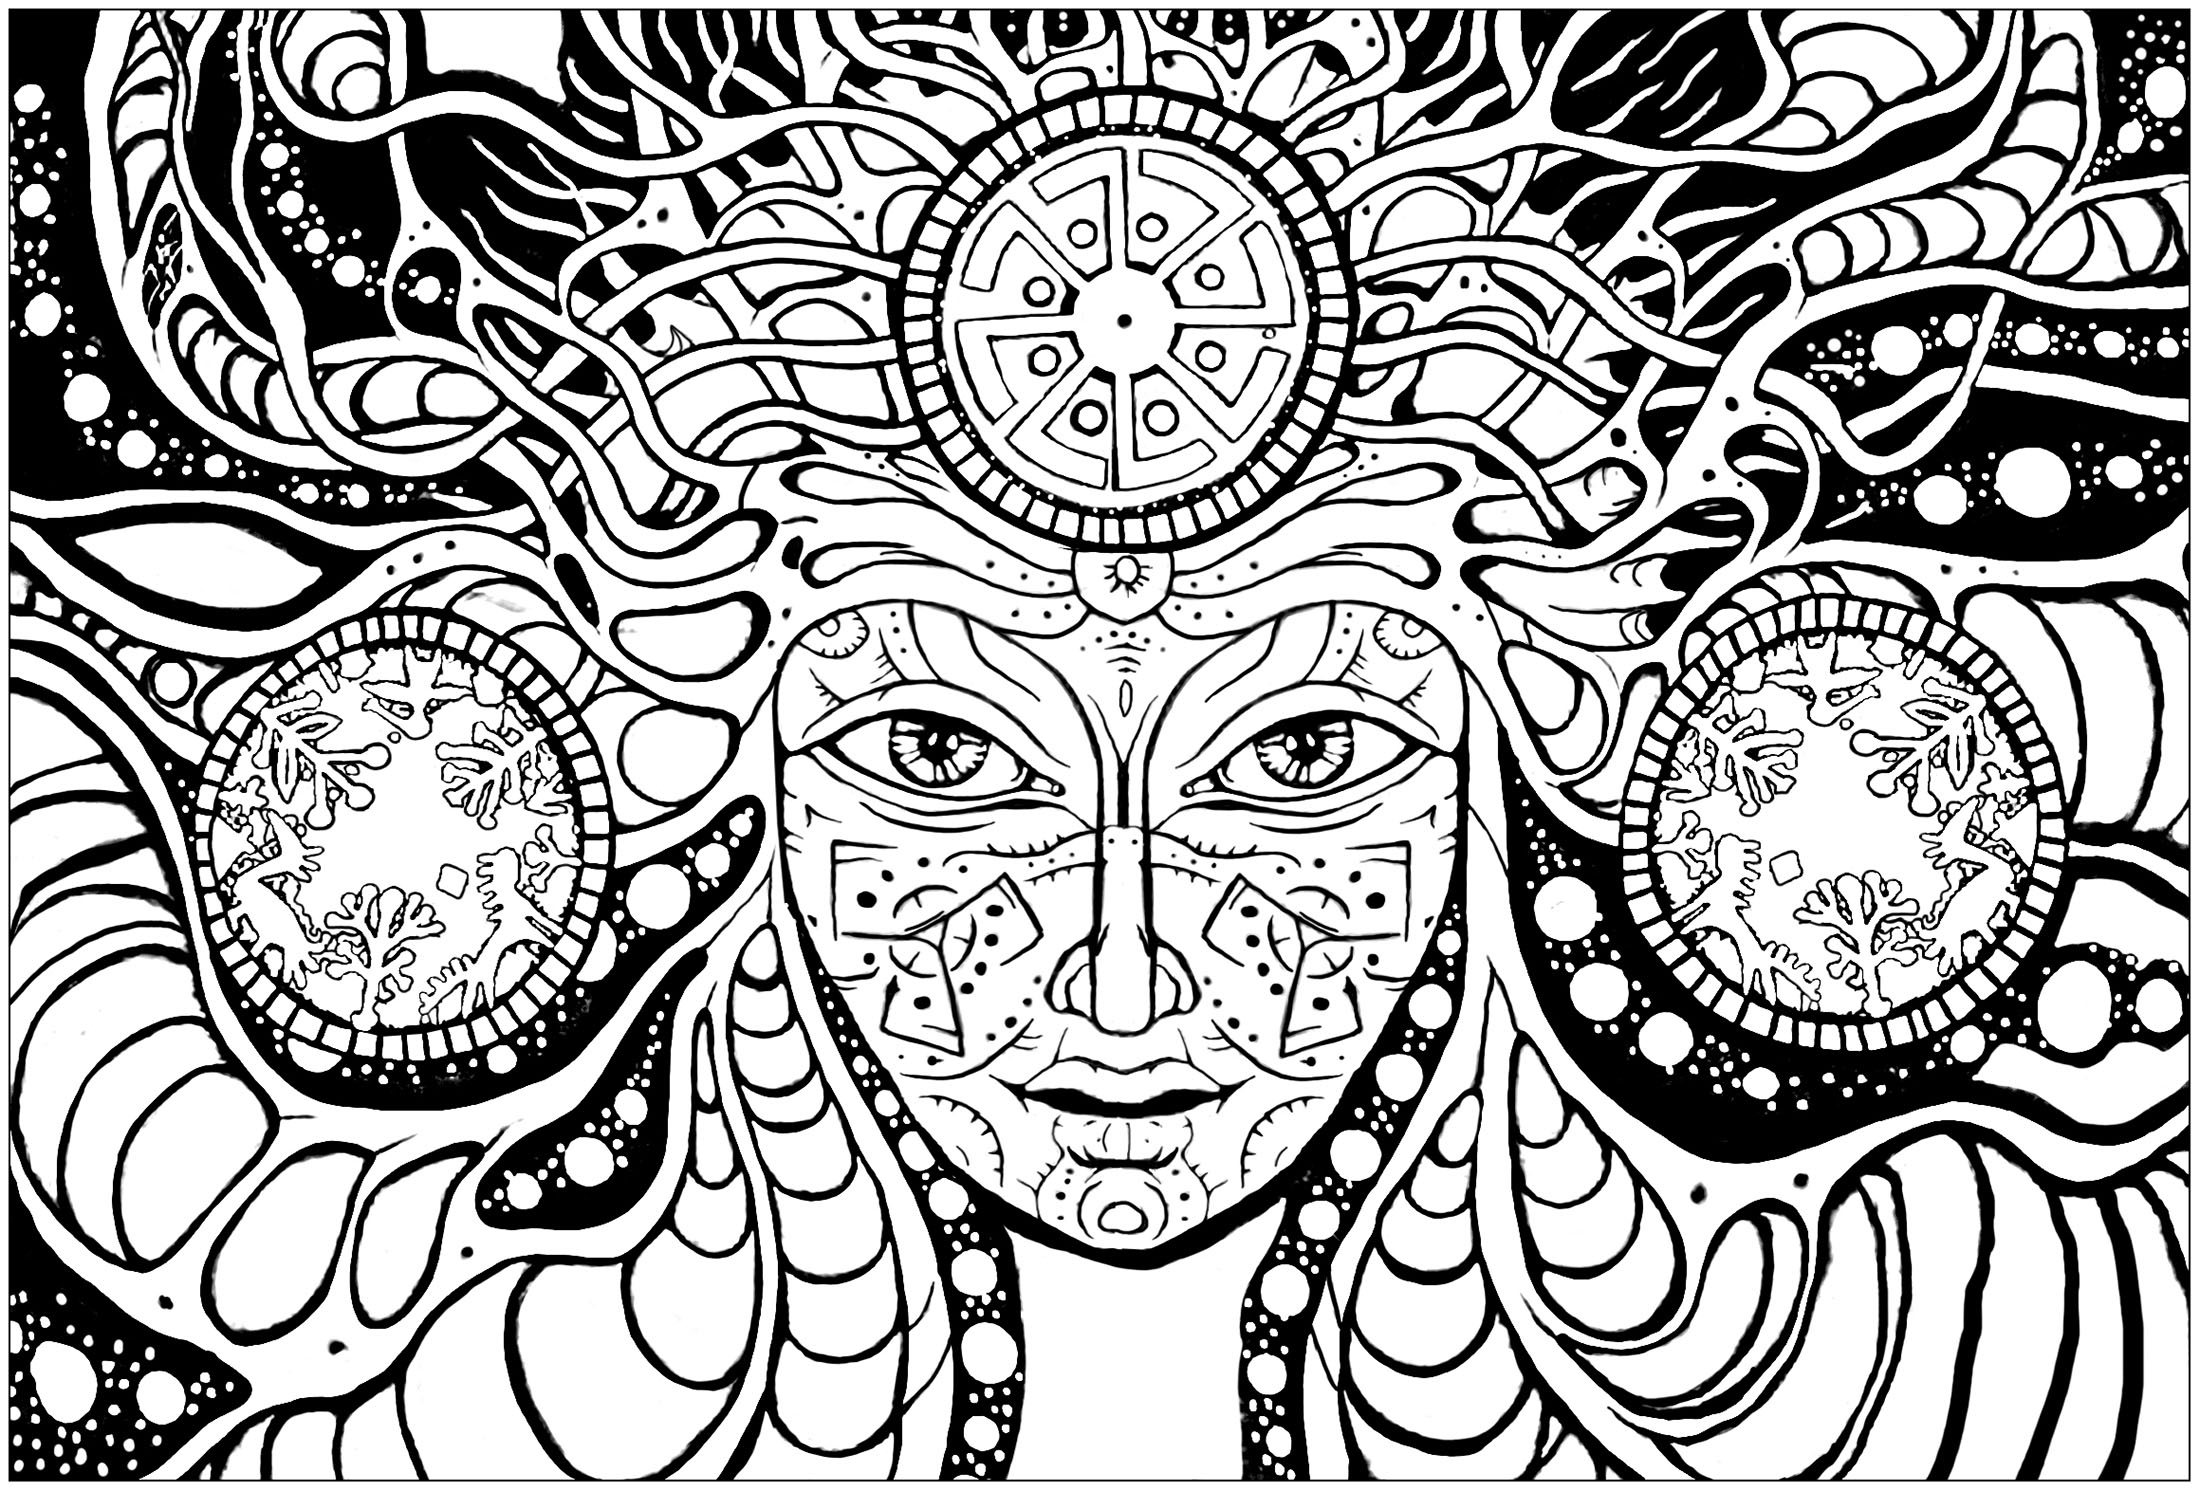 Psychedelic woman - Psychedelic Adult Coloring Pages